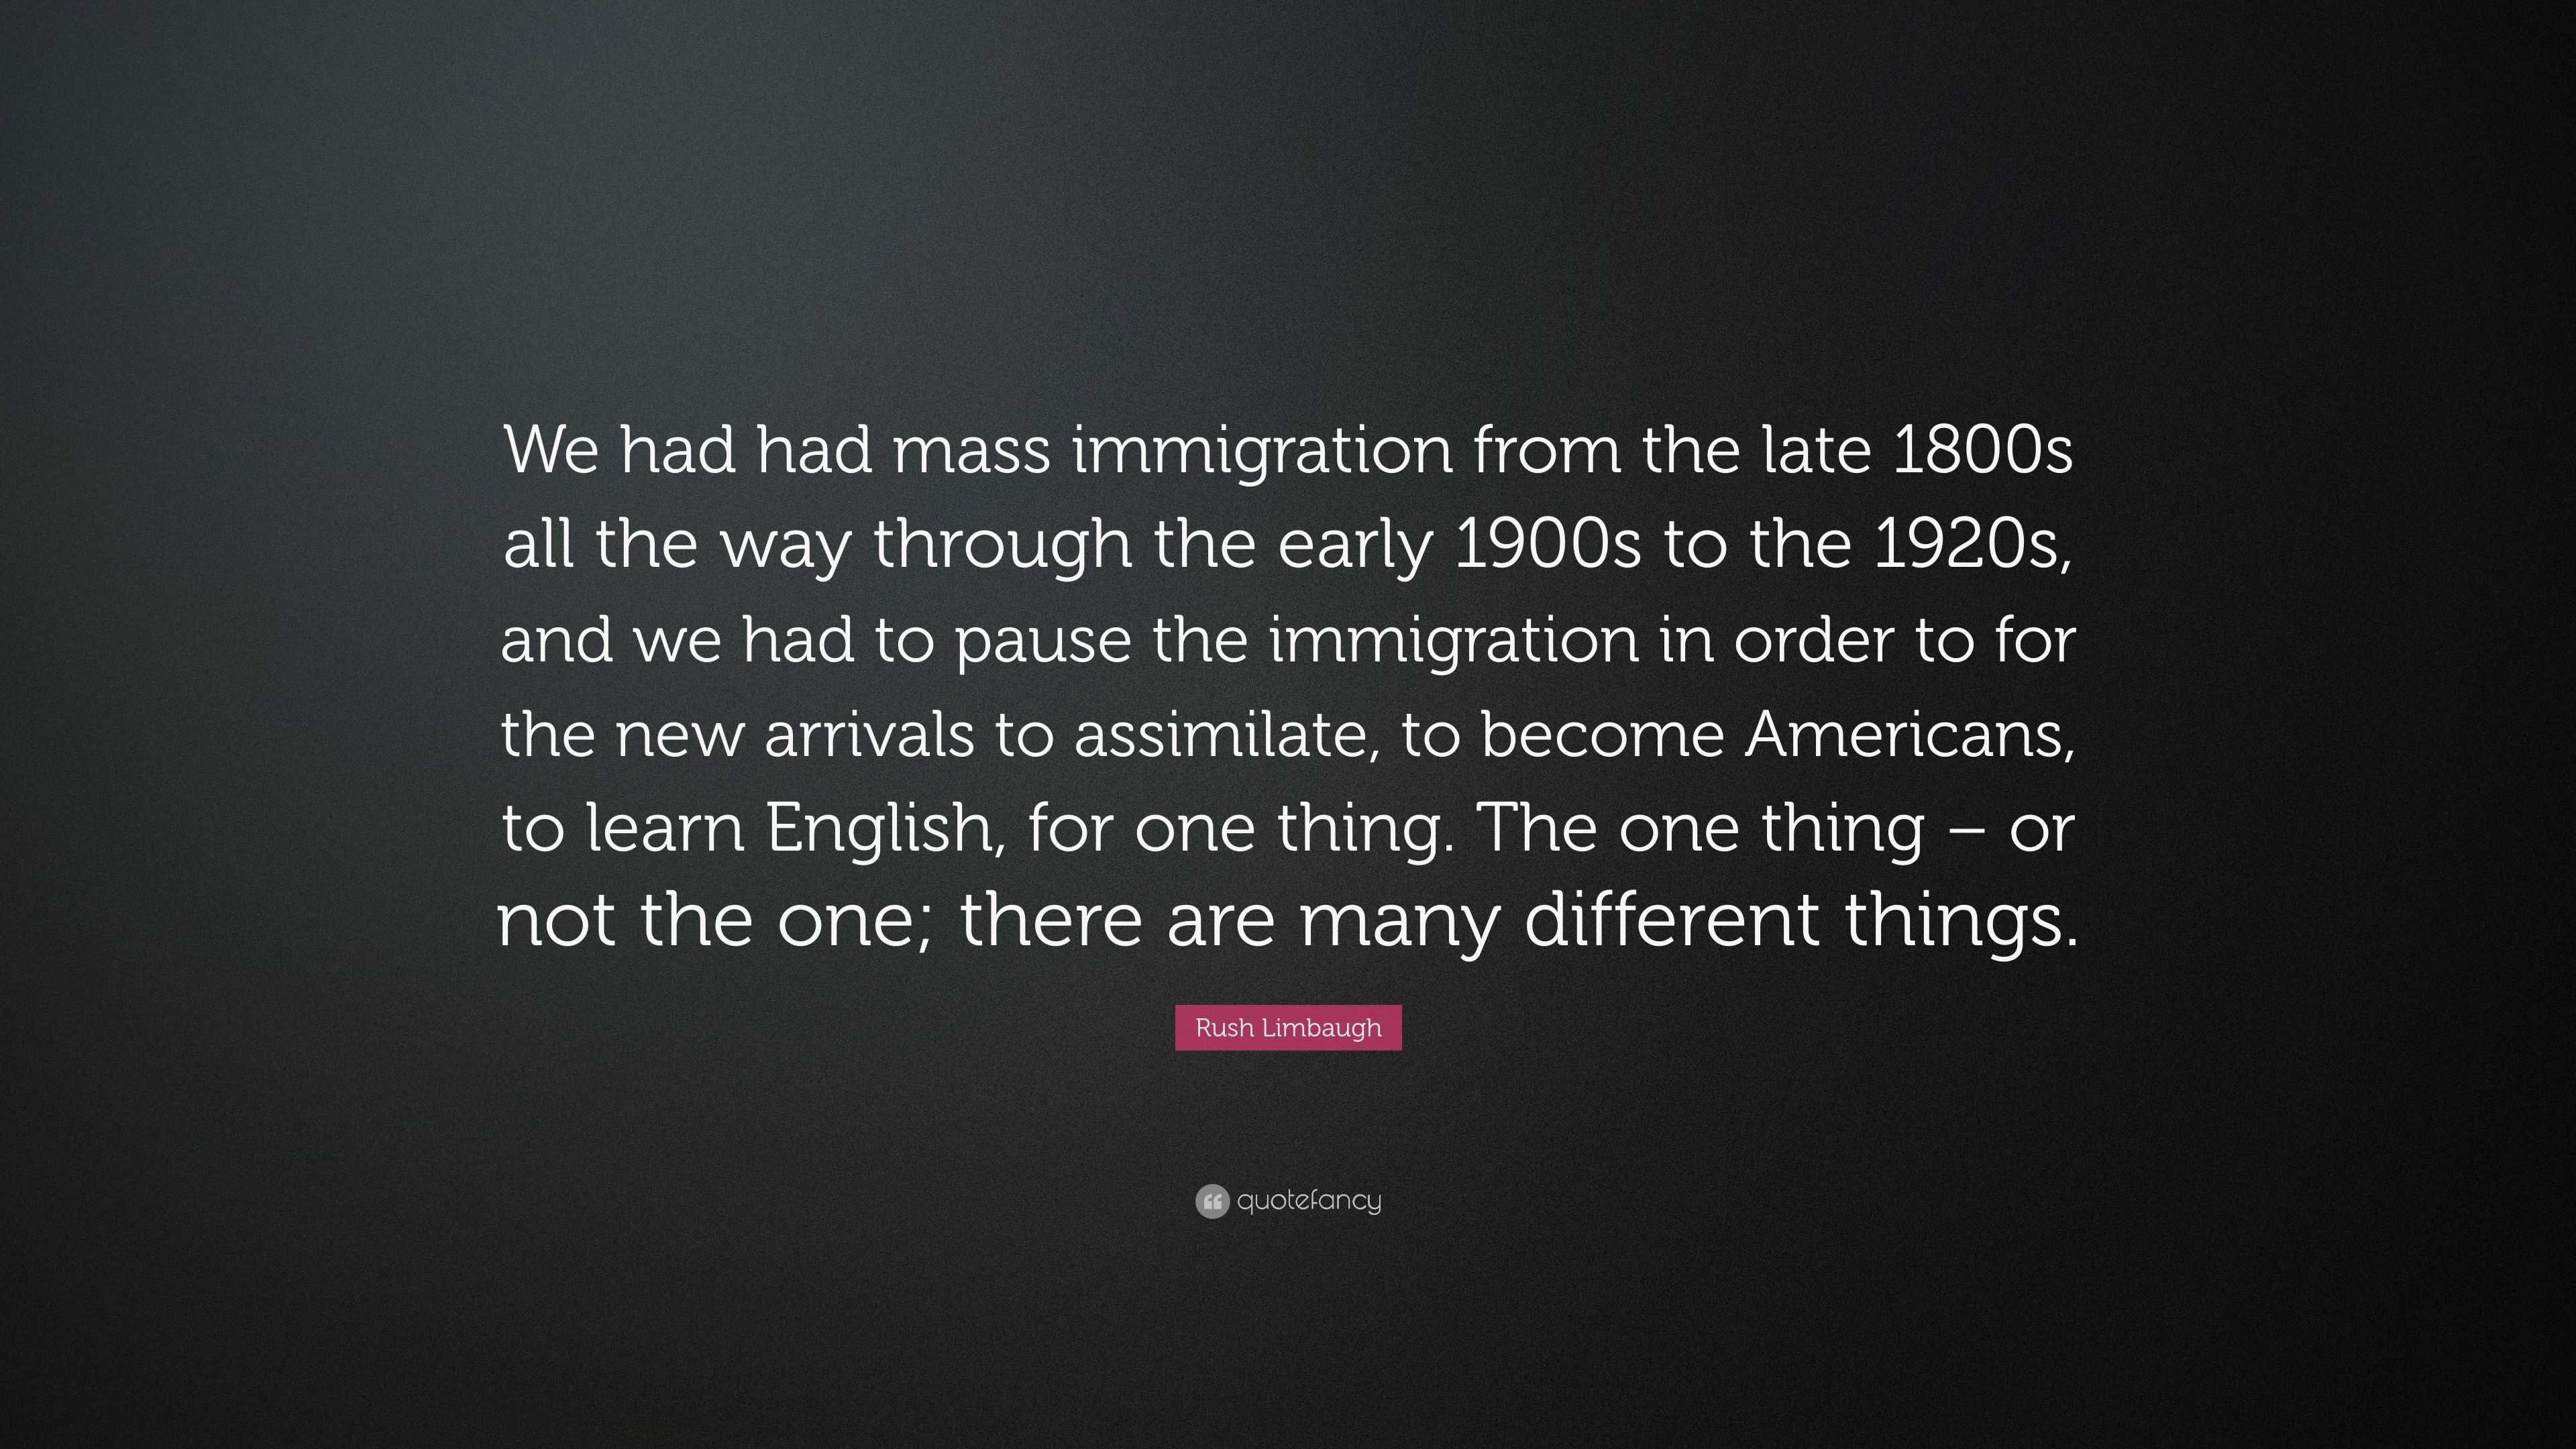 Essay on immigration in the late 1800s